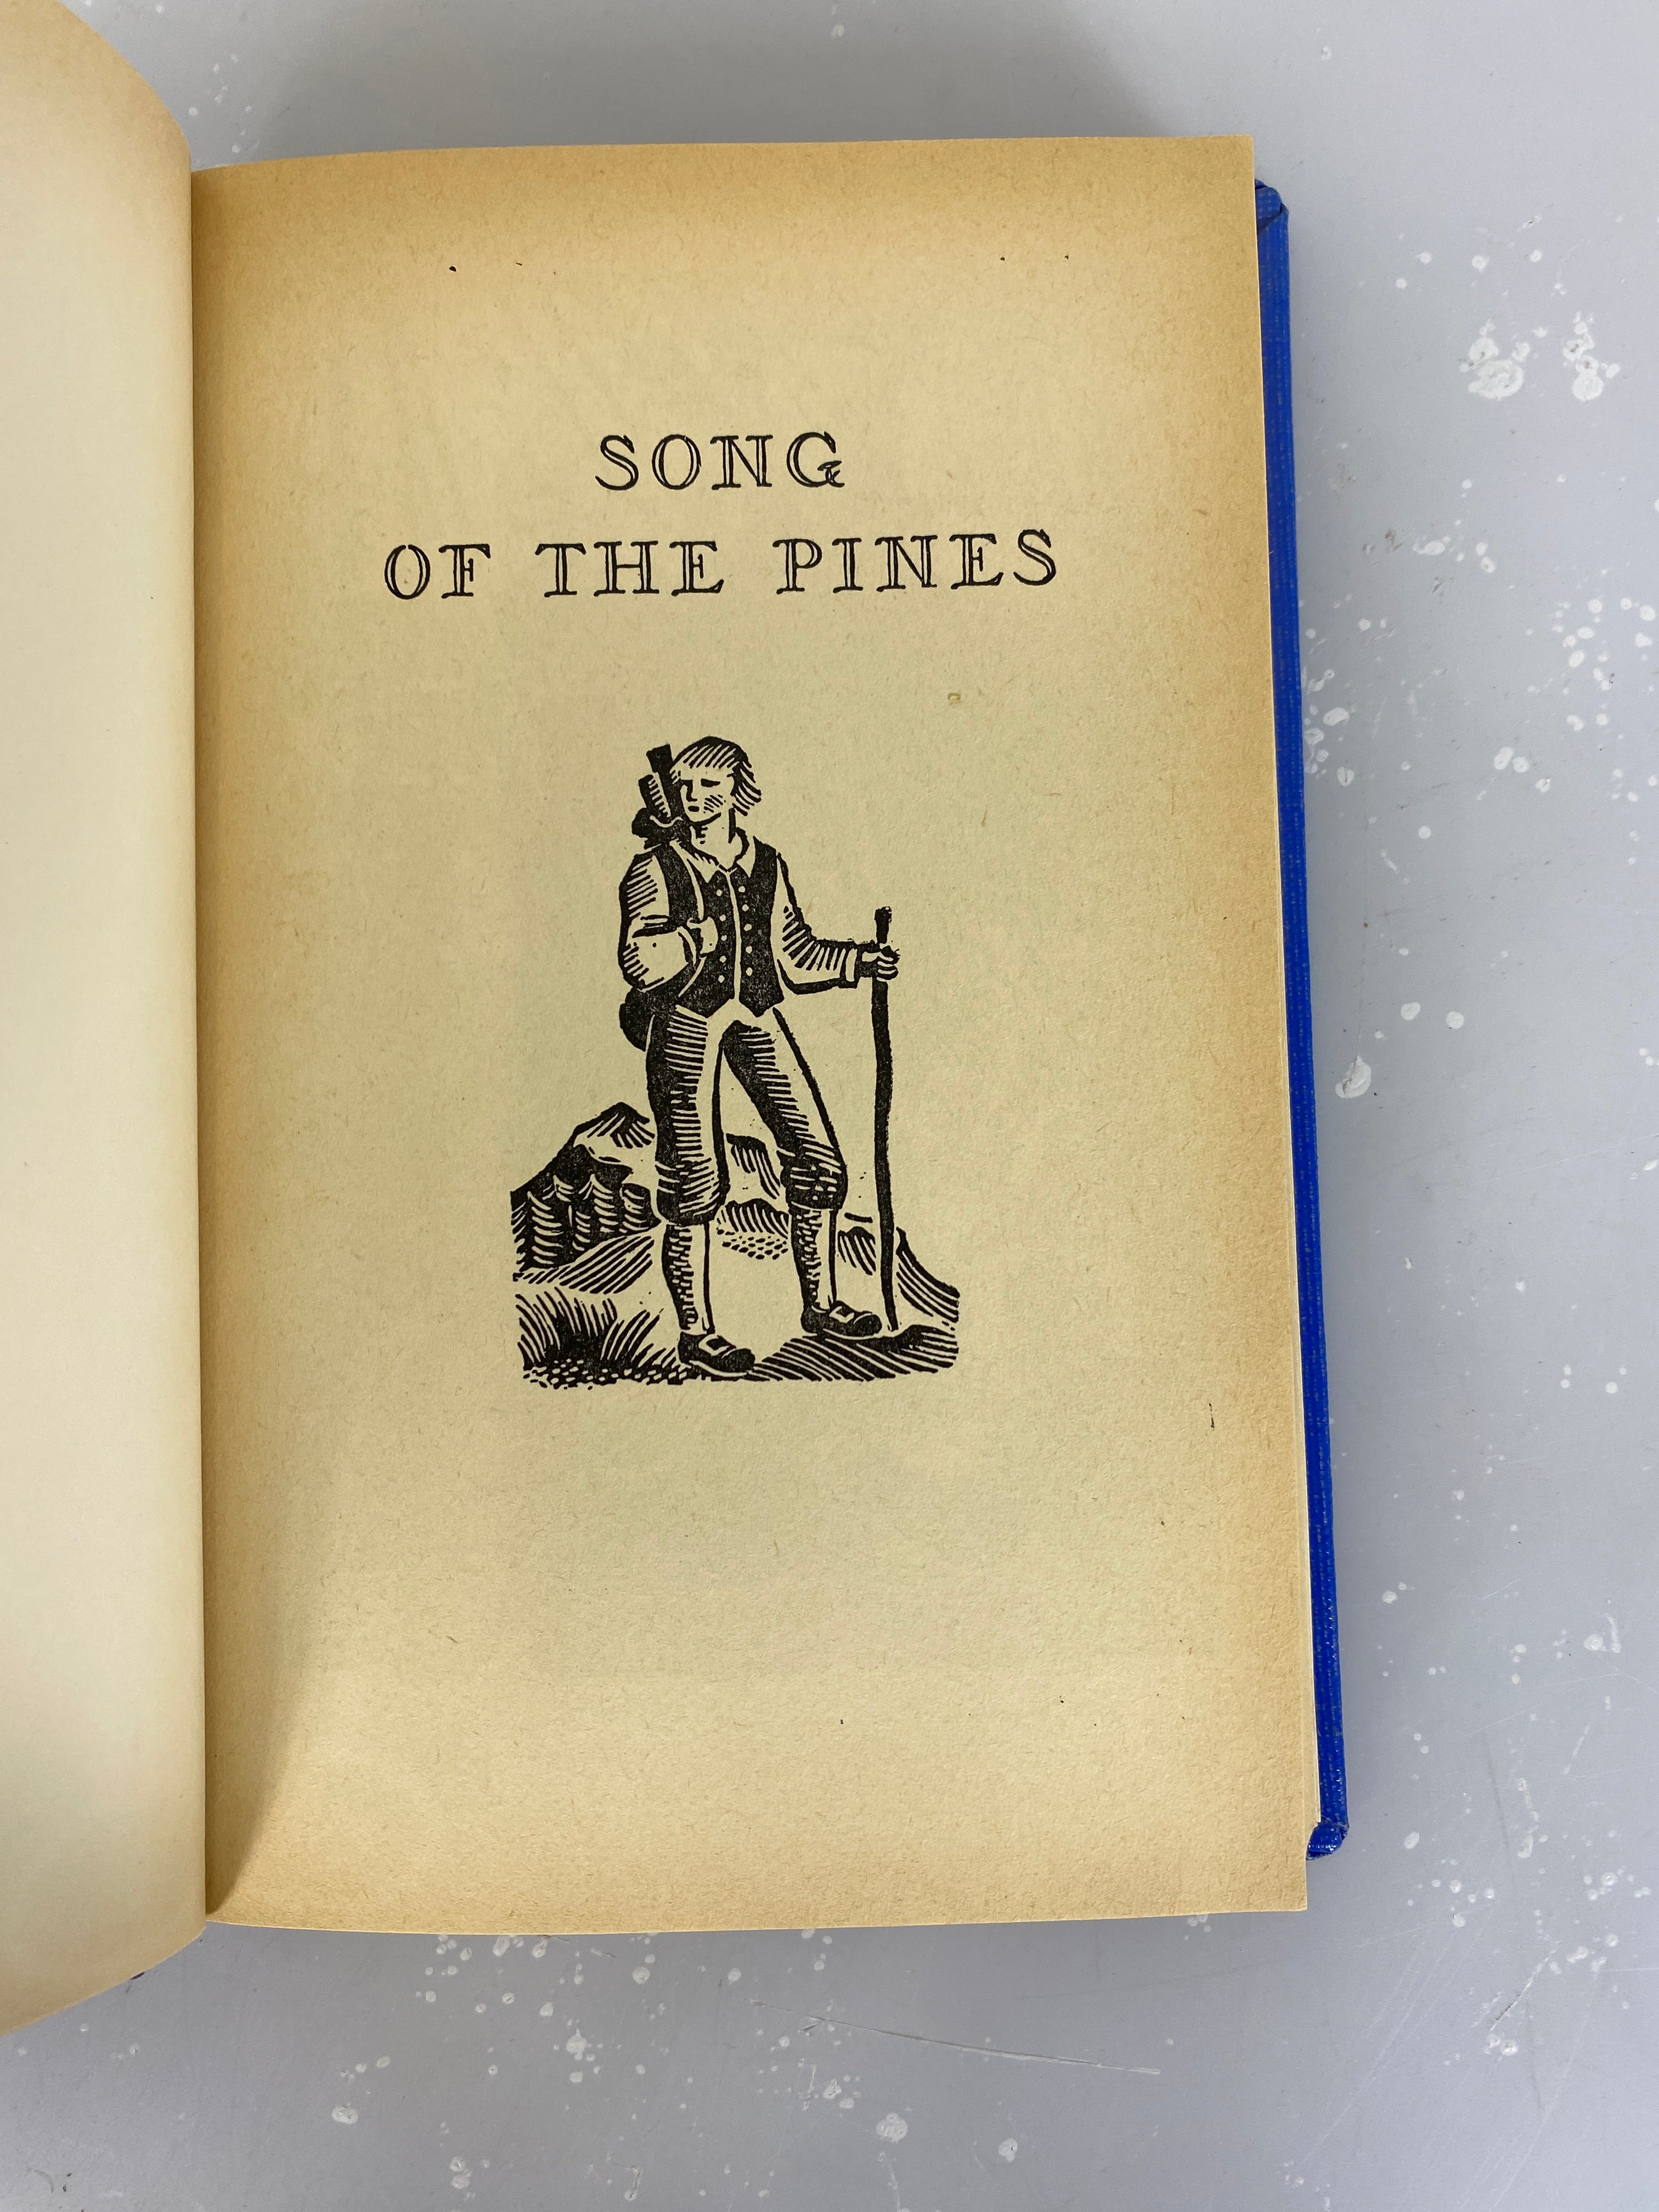 Song of the Pines by Walter and Marion Havighurst Eighth Printing 1961 HC